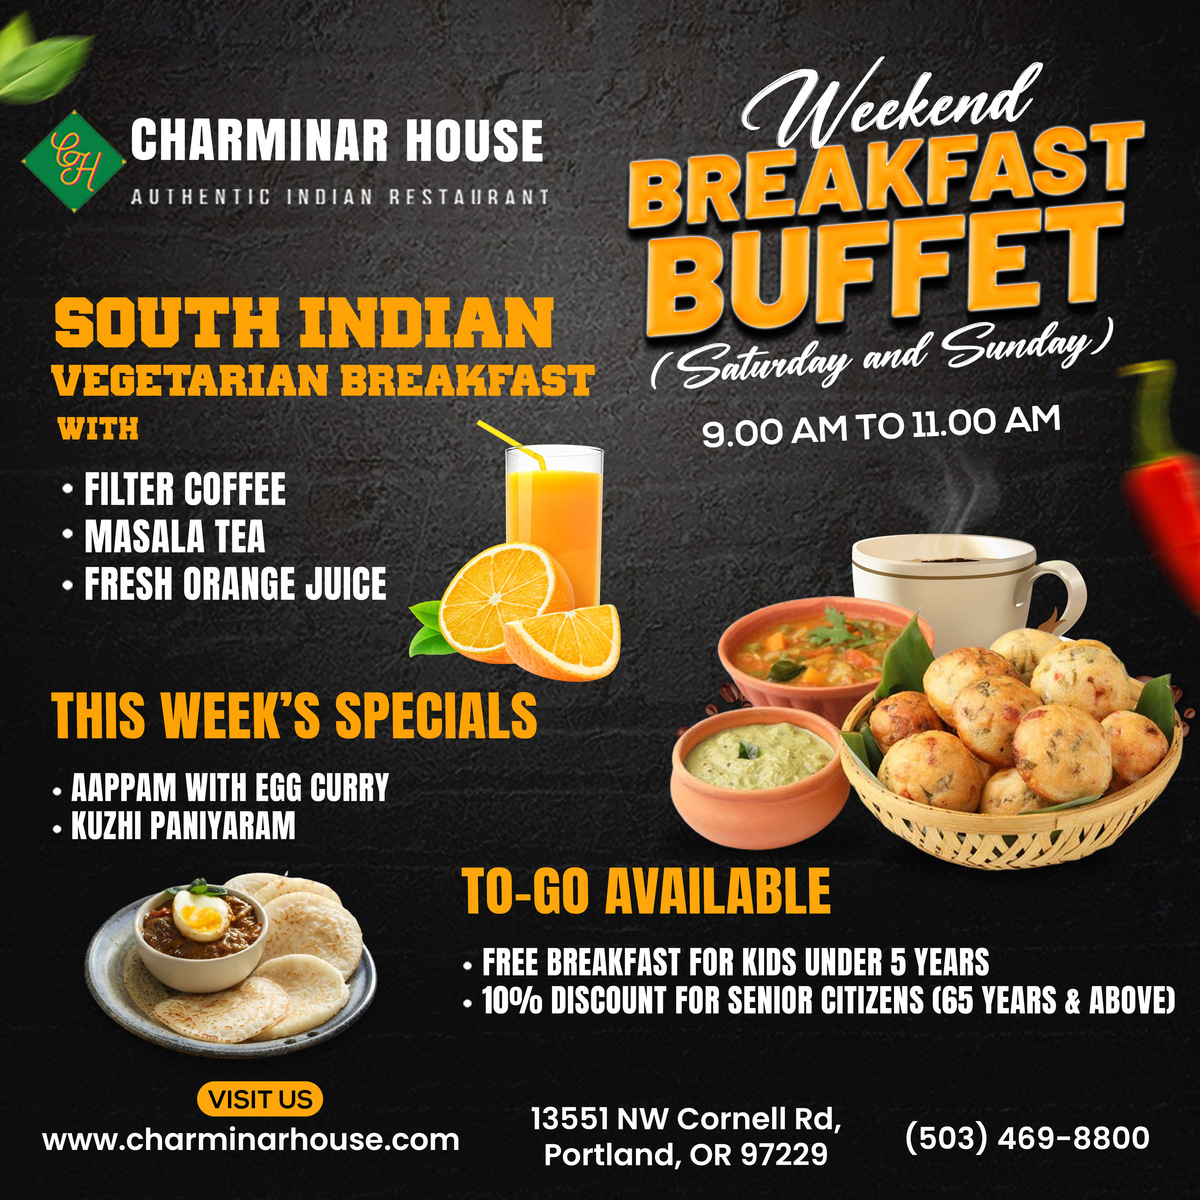 🌞 Join us for a delightful Weekend Breakfast Buffet on Saturday and Sunday! 🌞

🕘 Time: 9:00 AM to 11:00 AM
🚗 To-Go options available

📍 Visit us at 13551 NW Cornell Rd, Portland, OR 97229. 

#WeekendBreakfast #SouthIndianCuisine